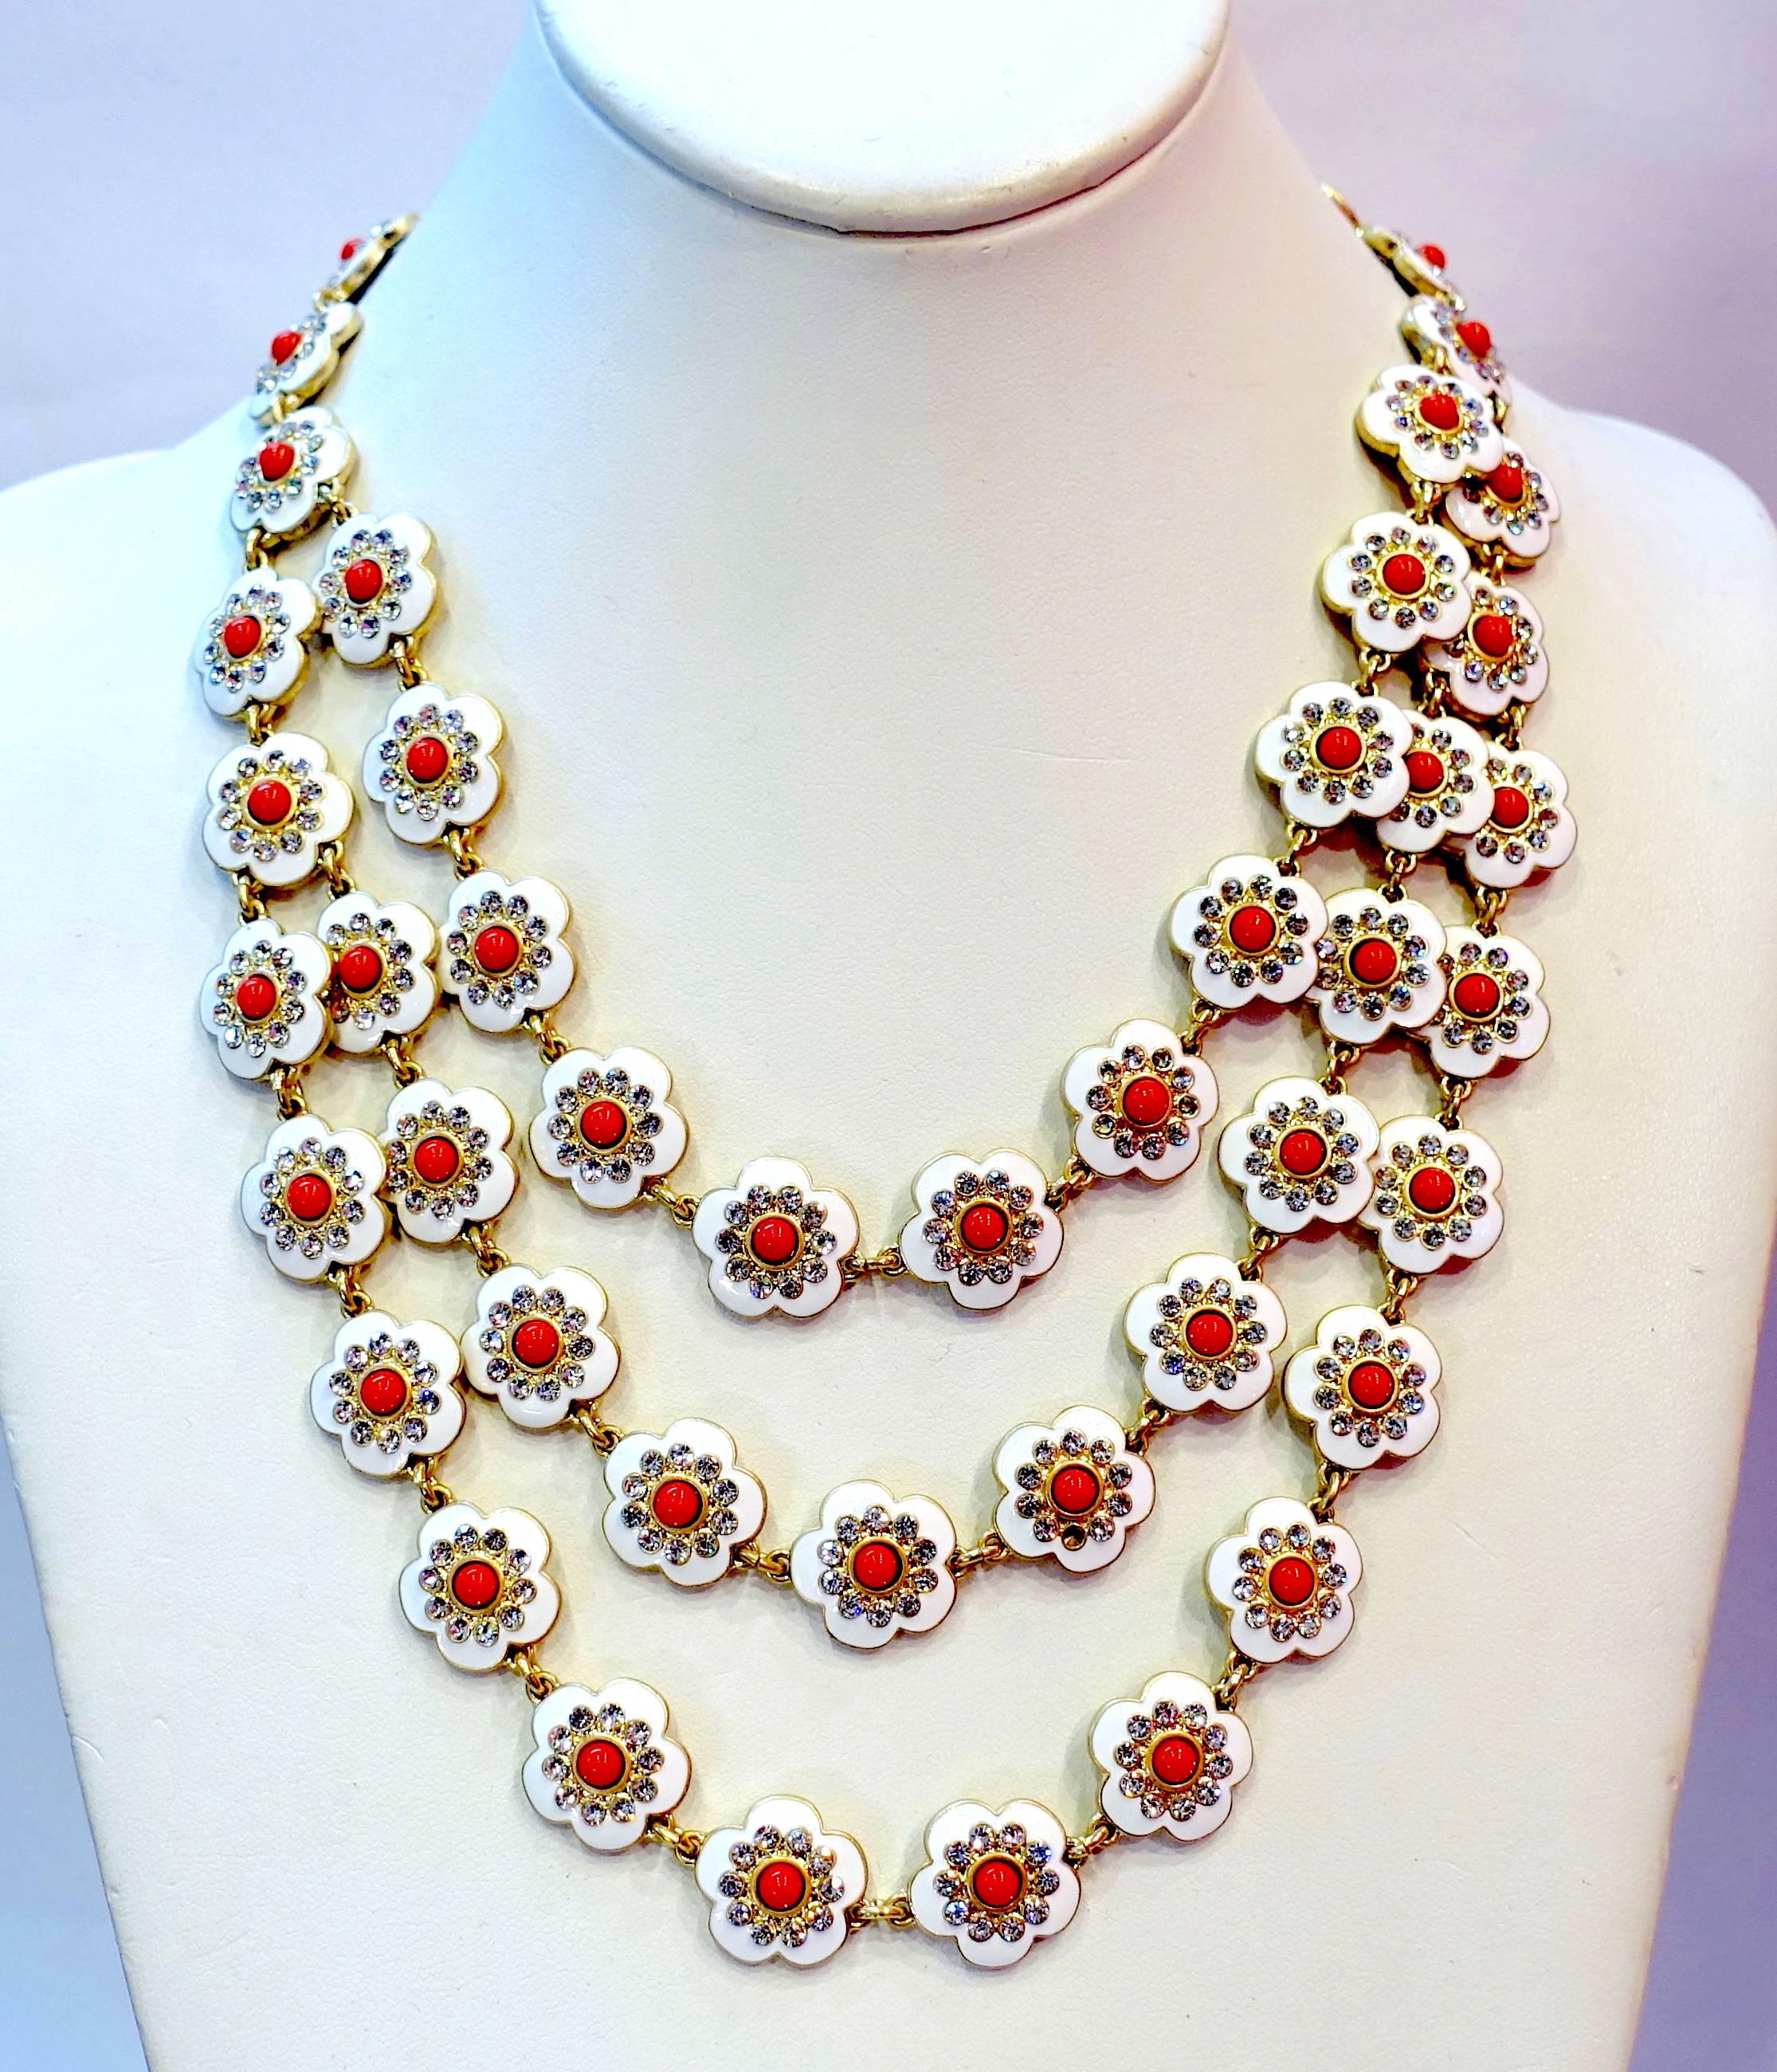 I fell in love with this necklace the instant I saw it and to find out it was made by Oscar de la Renta was an extra bonus.  The entire necklace has 3 rows of flowers that are white enamel with crystals surrounding a red center stone.  The top row